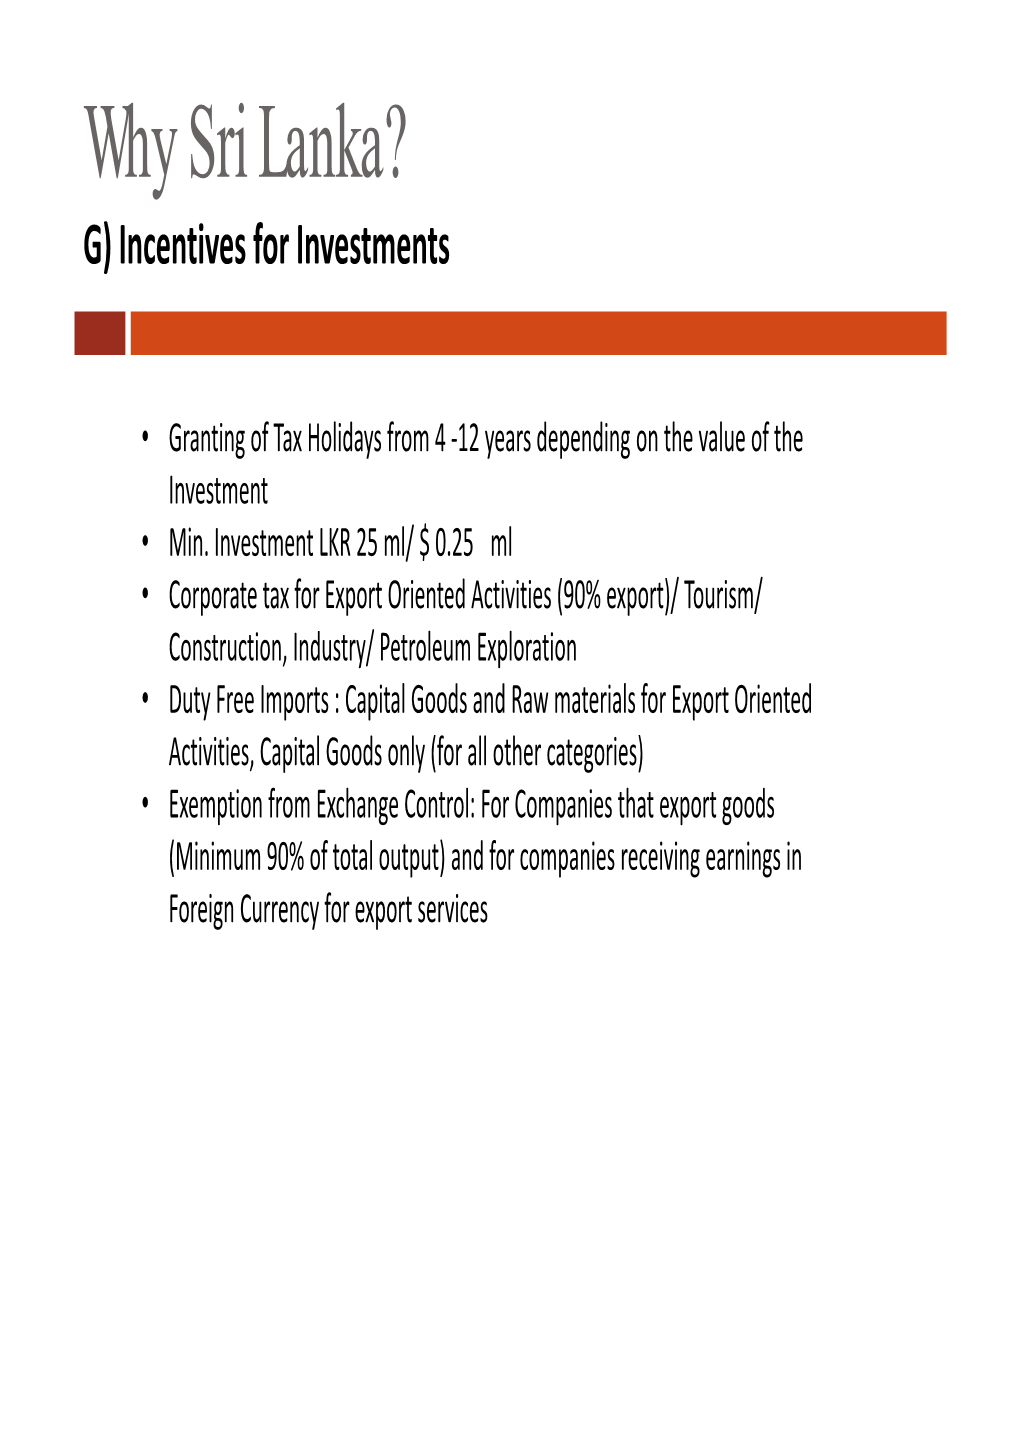 Why Sri Lanka? G) Incentives for Investments